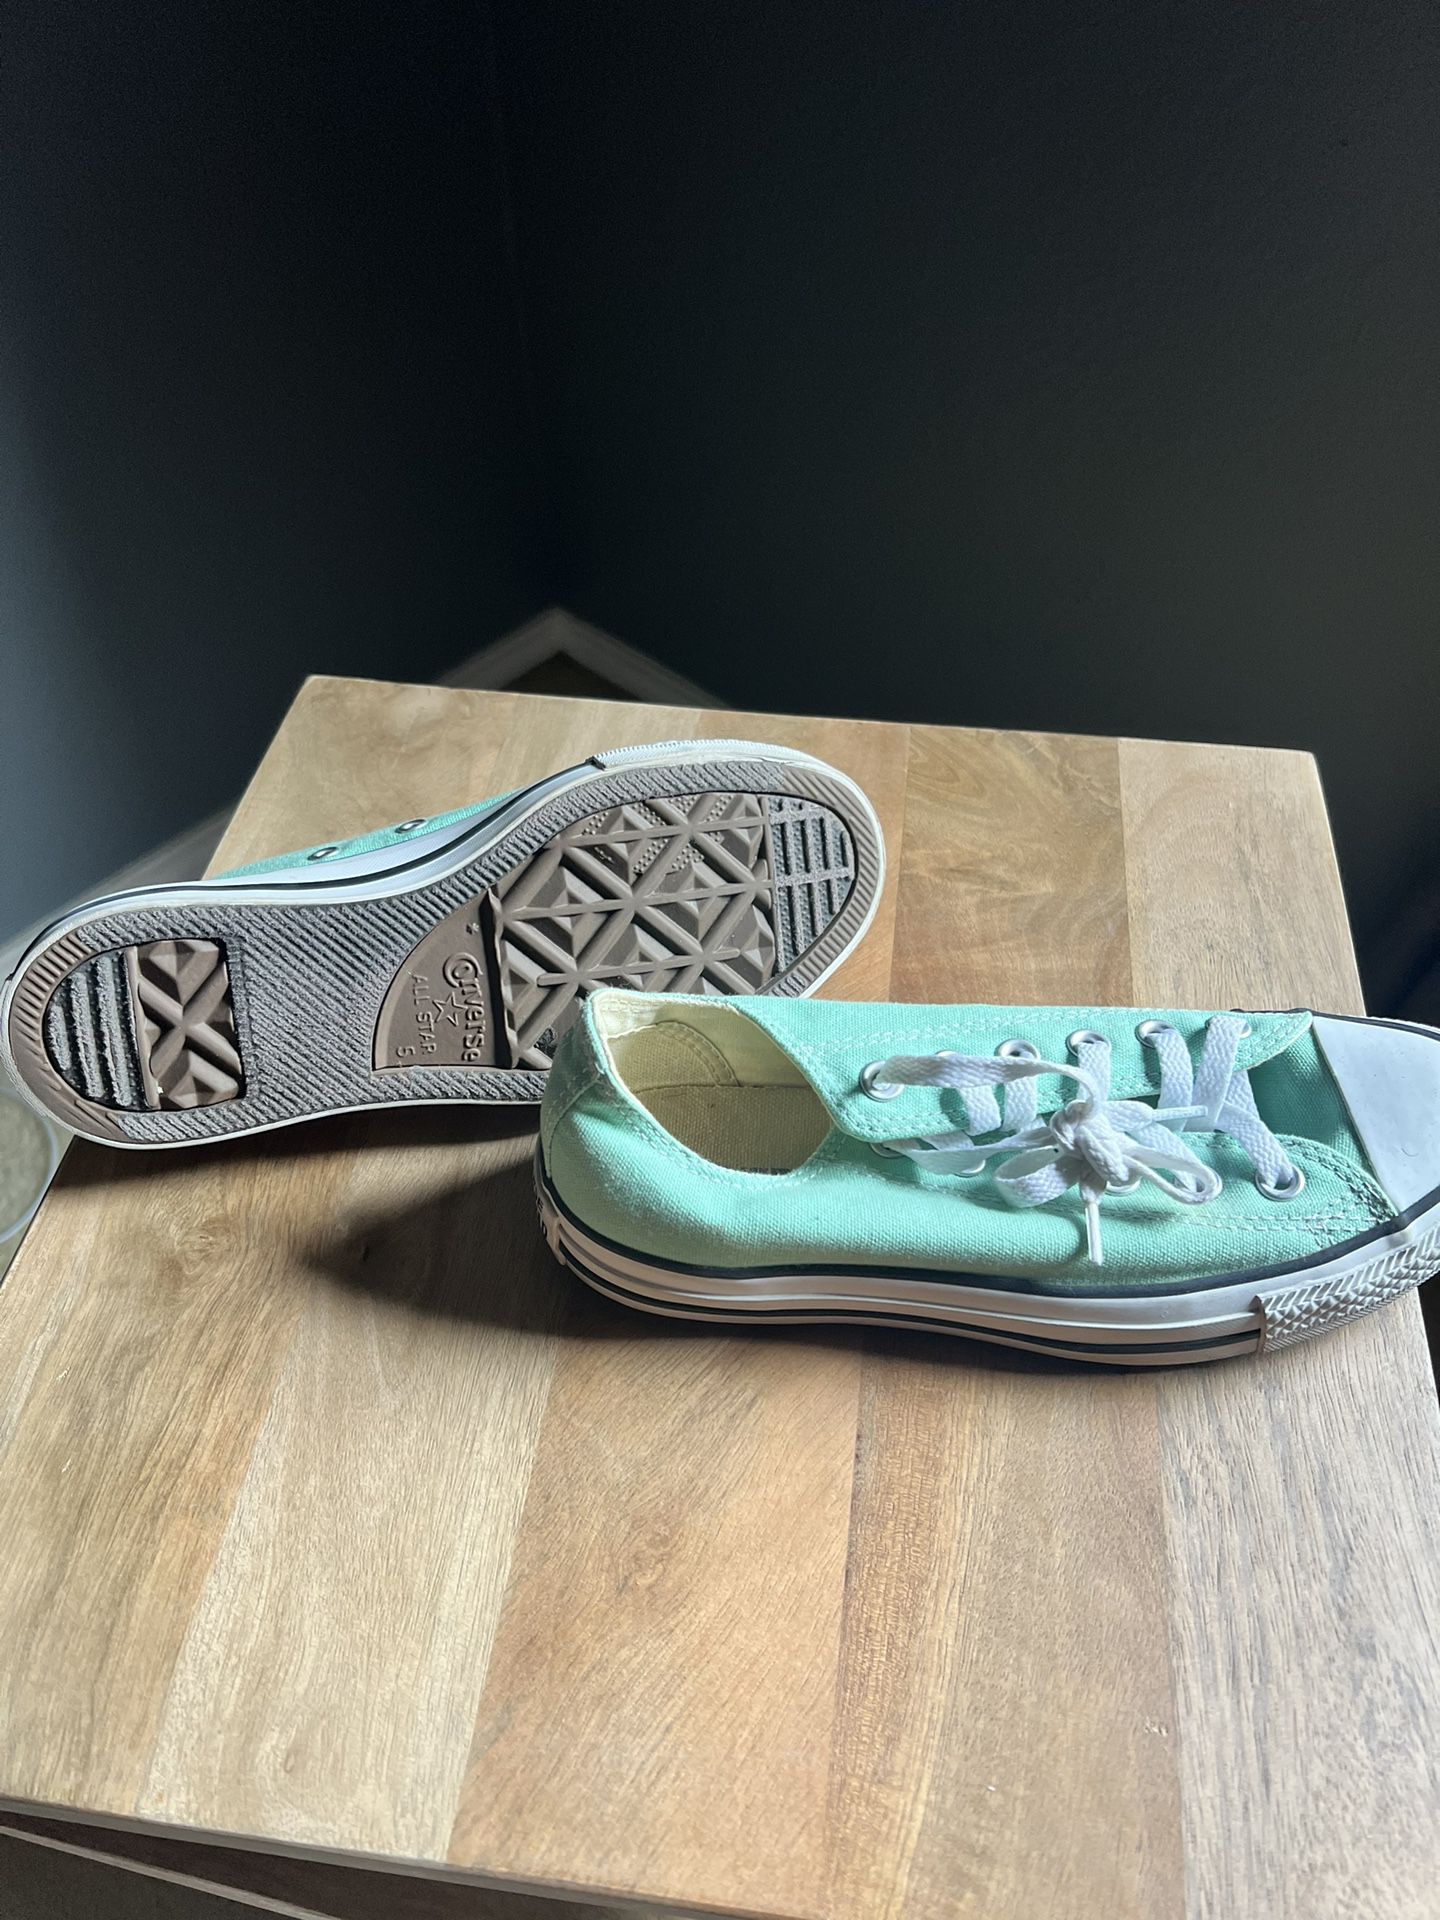 Used mint green Converse size 5 